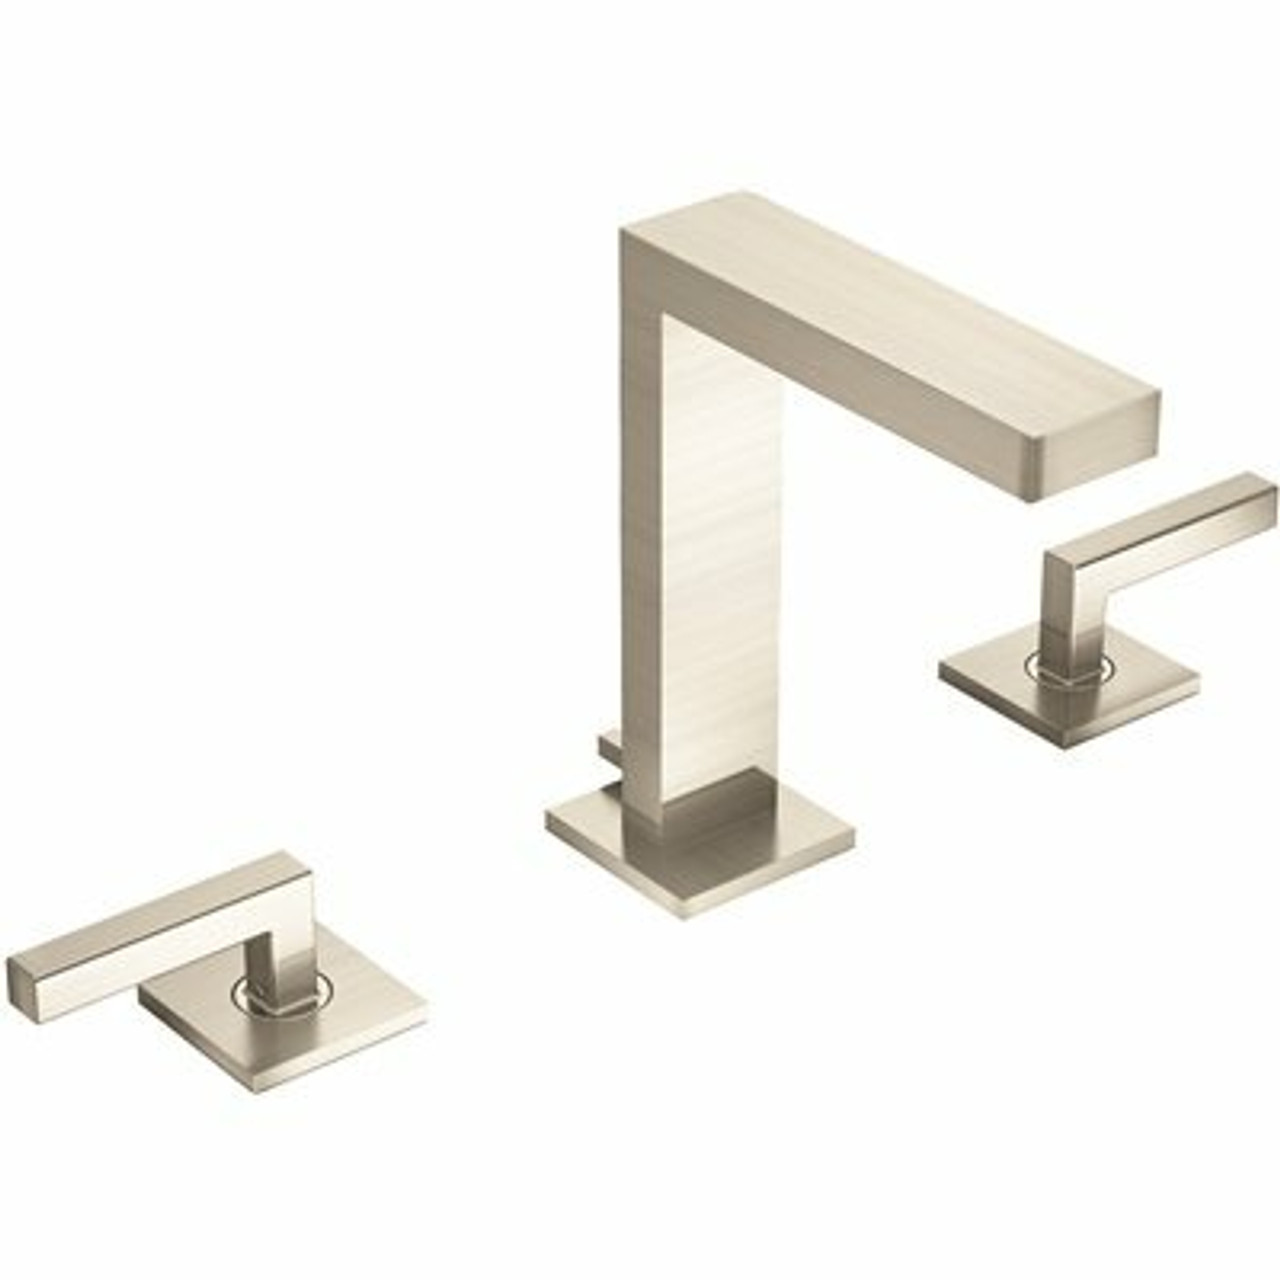 Symmons Duro 8 In. Widespread 2-Handle Bathroom Faucet With Drain Assembly In Brushed Nickel